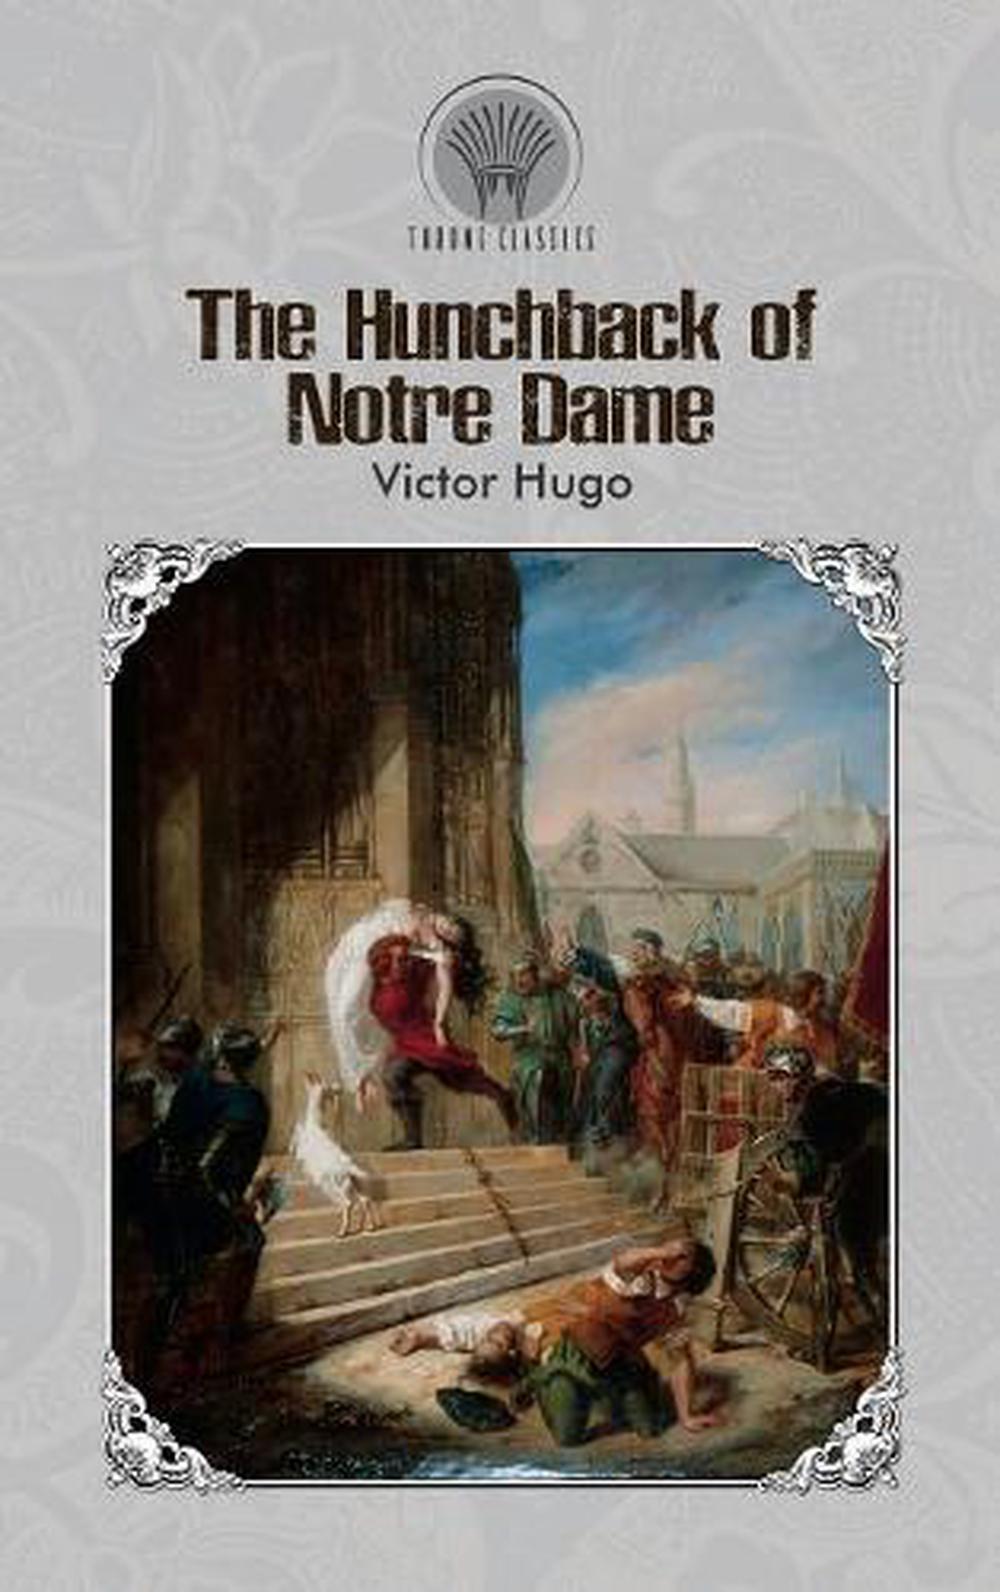 Hunchback of Notre Dame by Victor Hugo (English) Hardcover Book Free